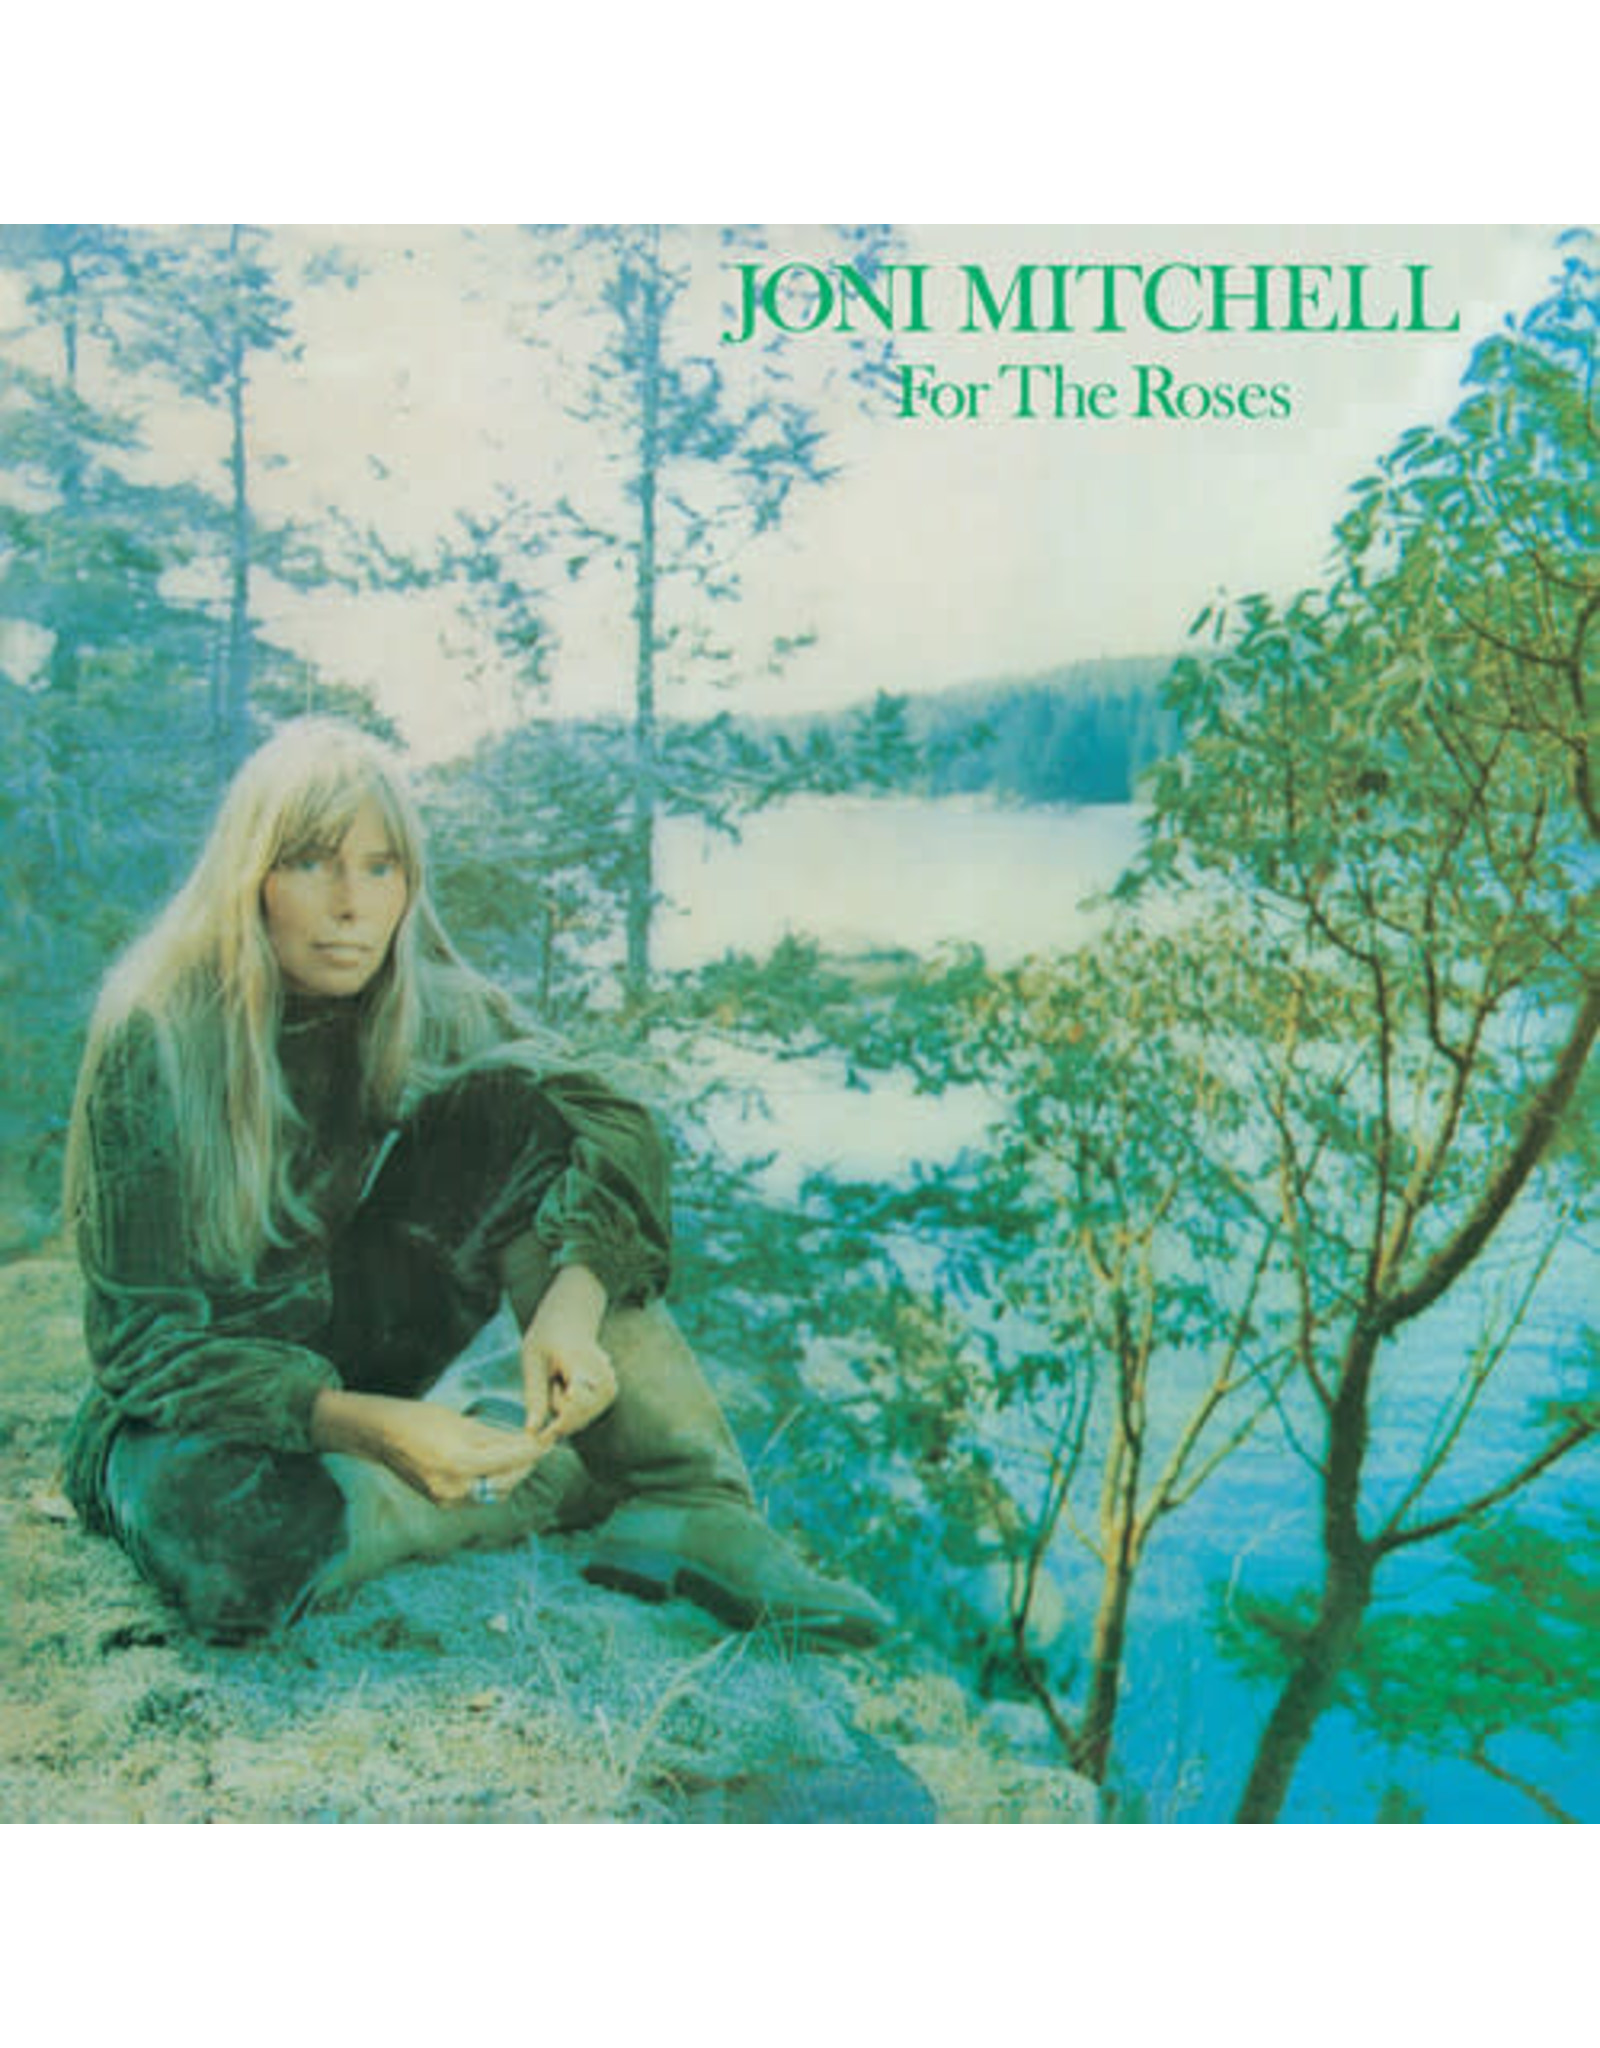 New Vinyl Joni Mitchell -  For The Roses (Remastered) LP